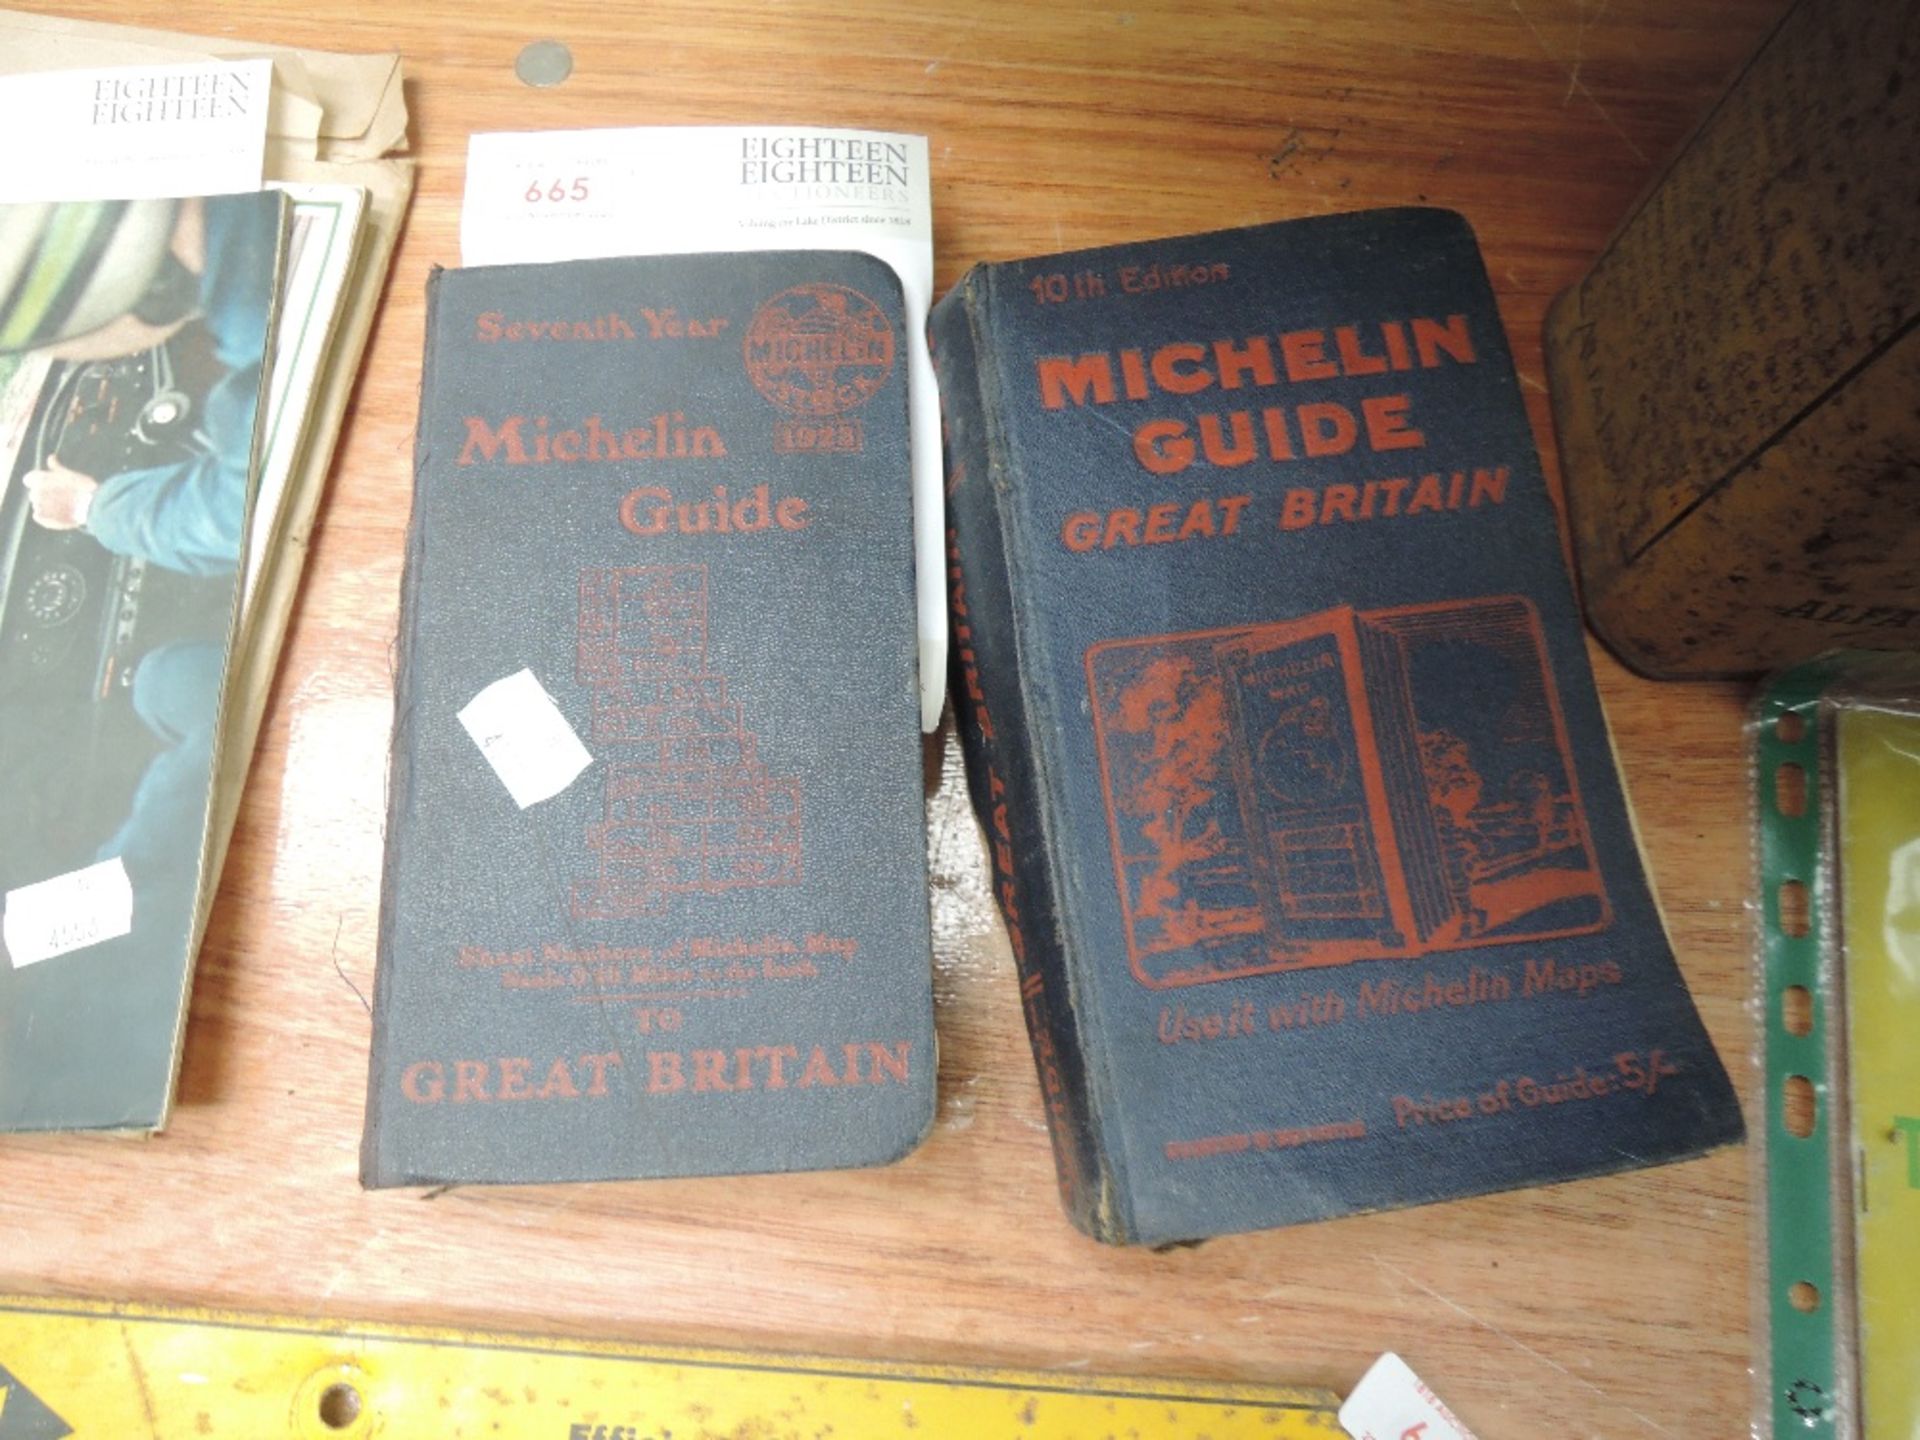 Two Michelin guides to great Britain one 1923 the other possibly 1929.